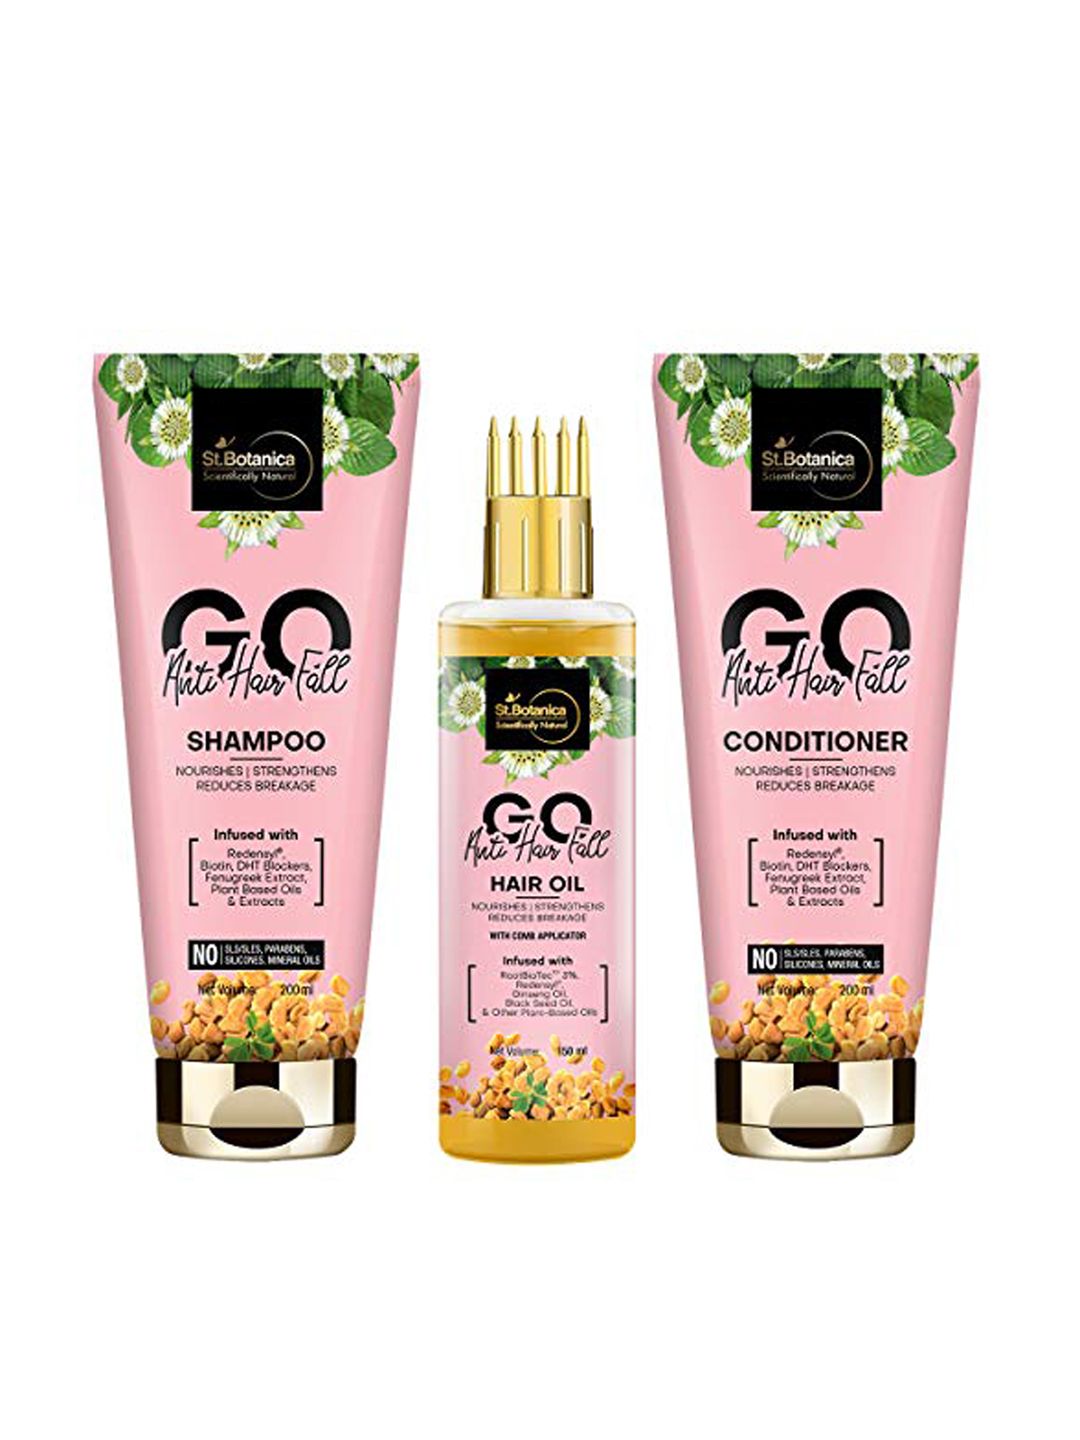 St.Botanica Unisex Set of GO Anti Hair Fall Shampoo-Conditioner & Hair Oil Price in India